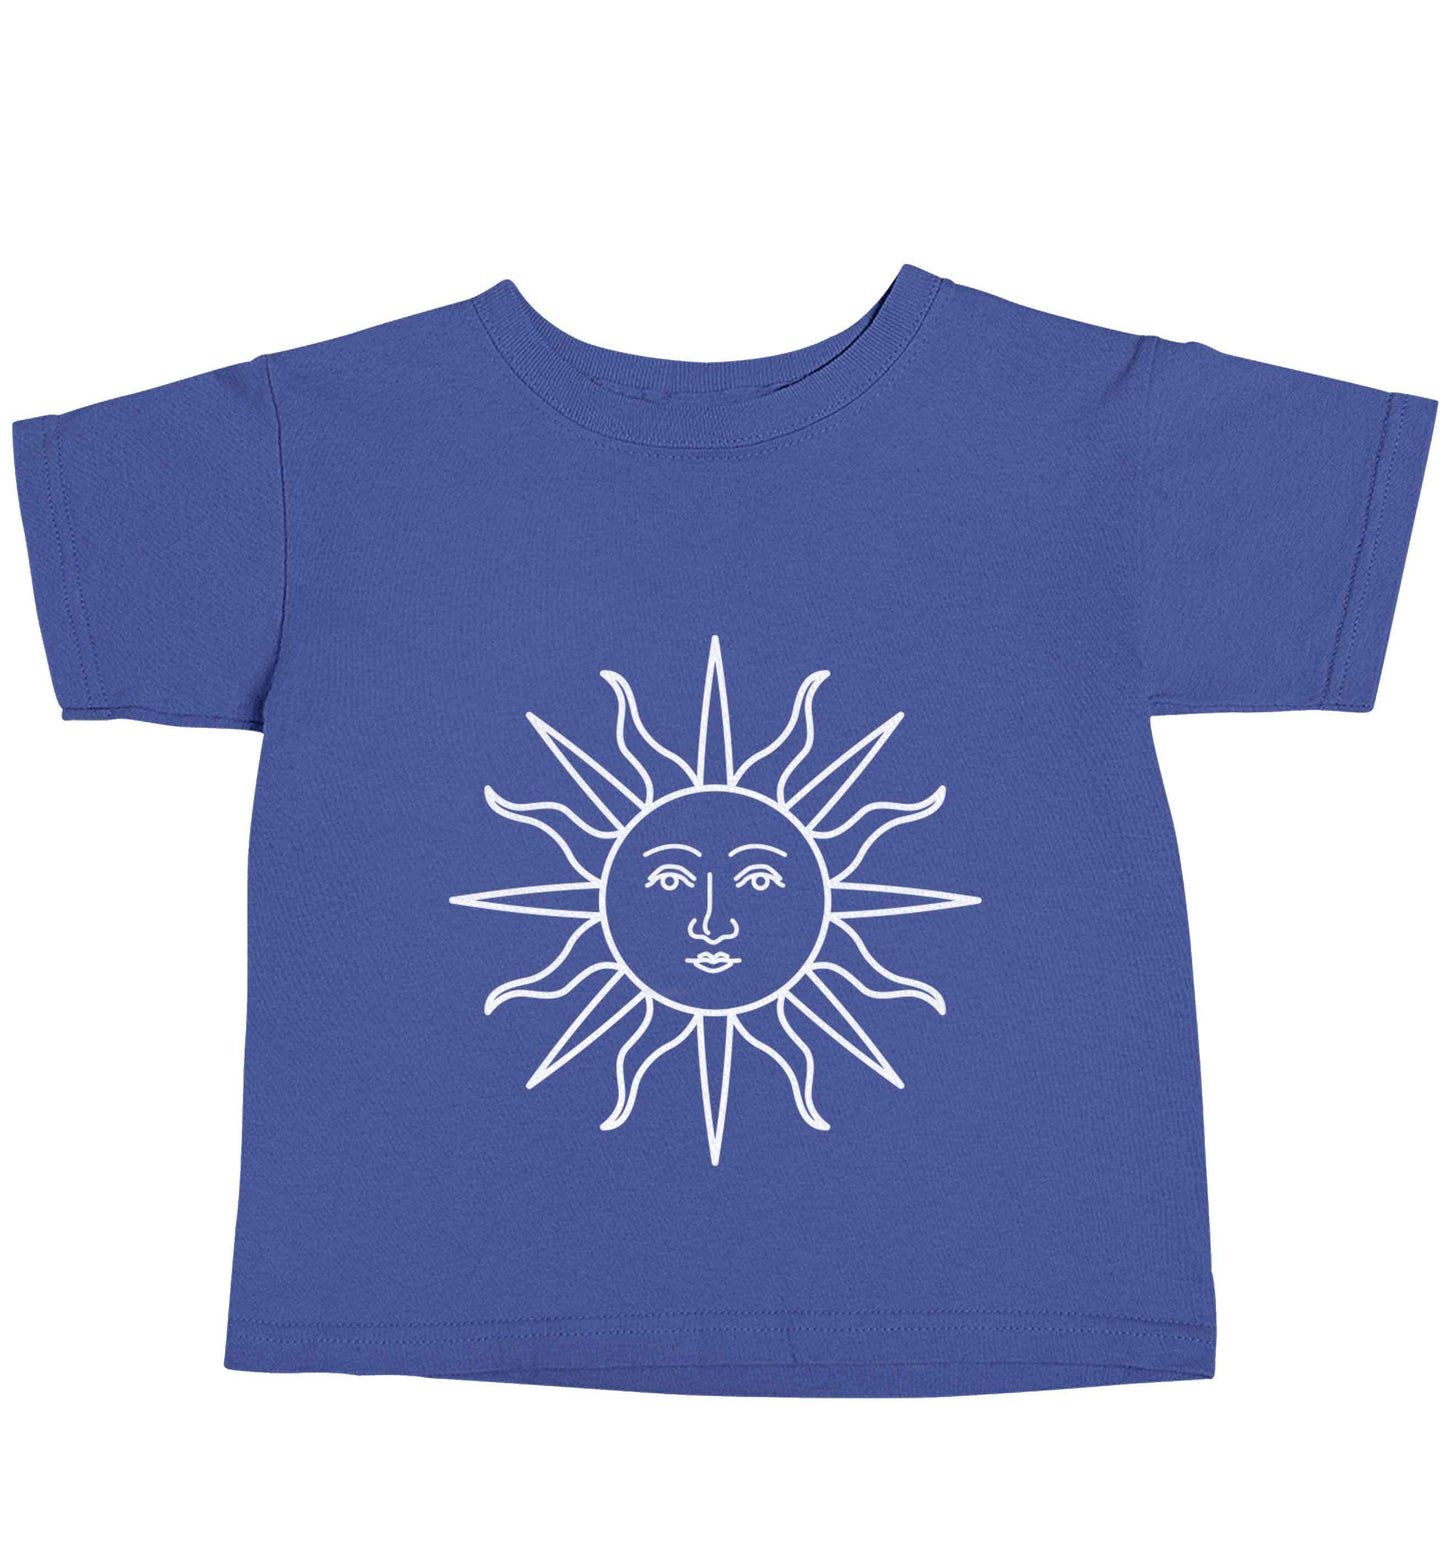 Sun face illustration blue baby toddler Tshirt 2 Years